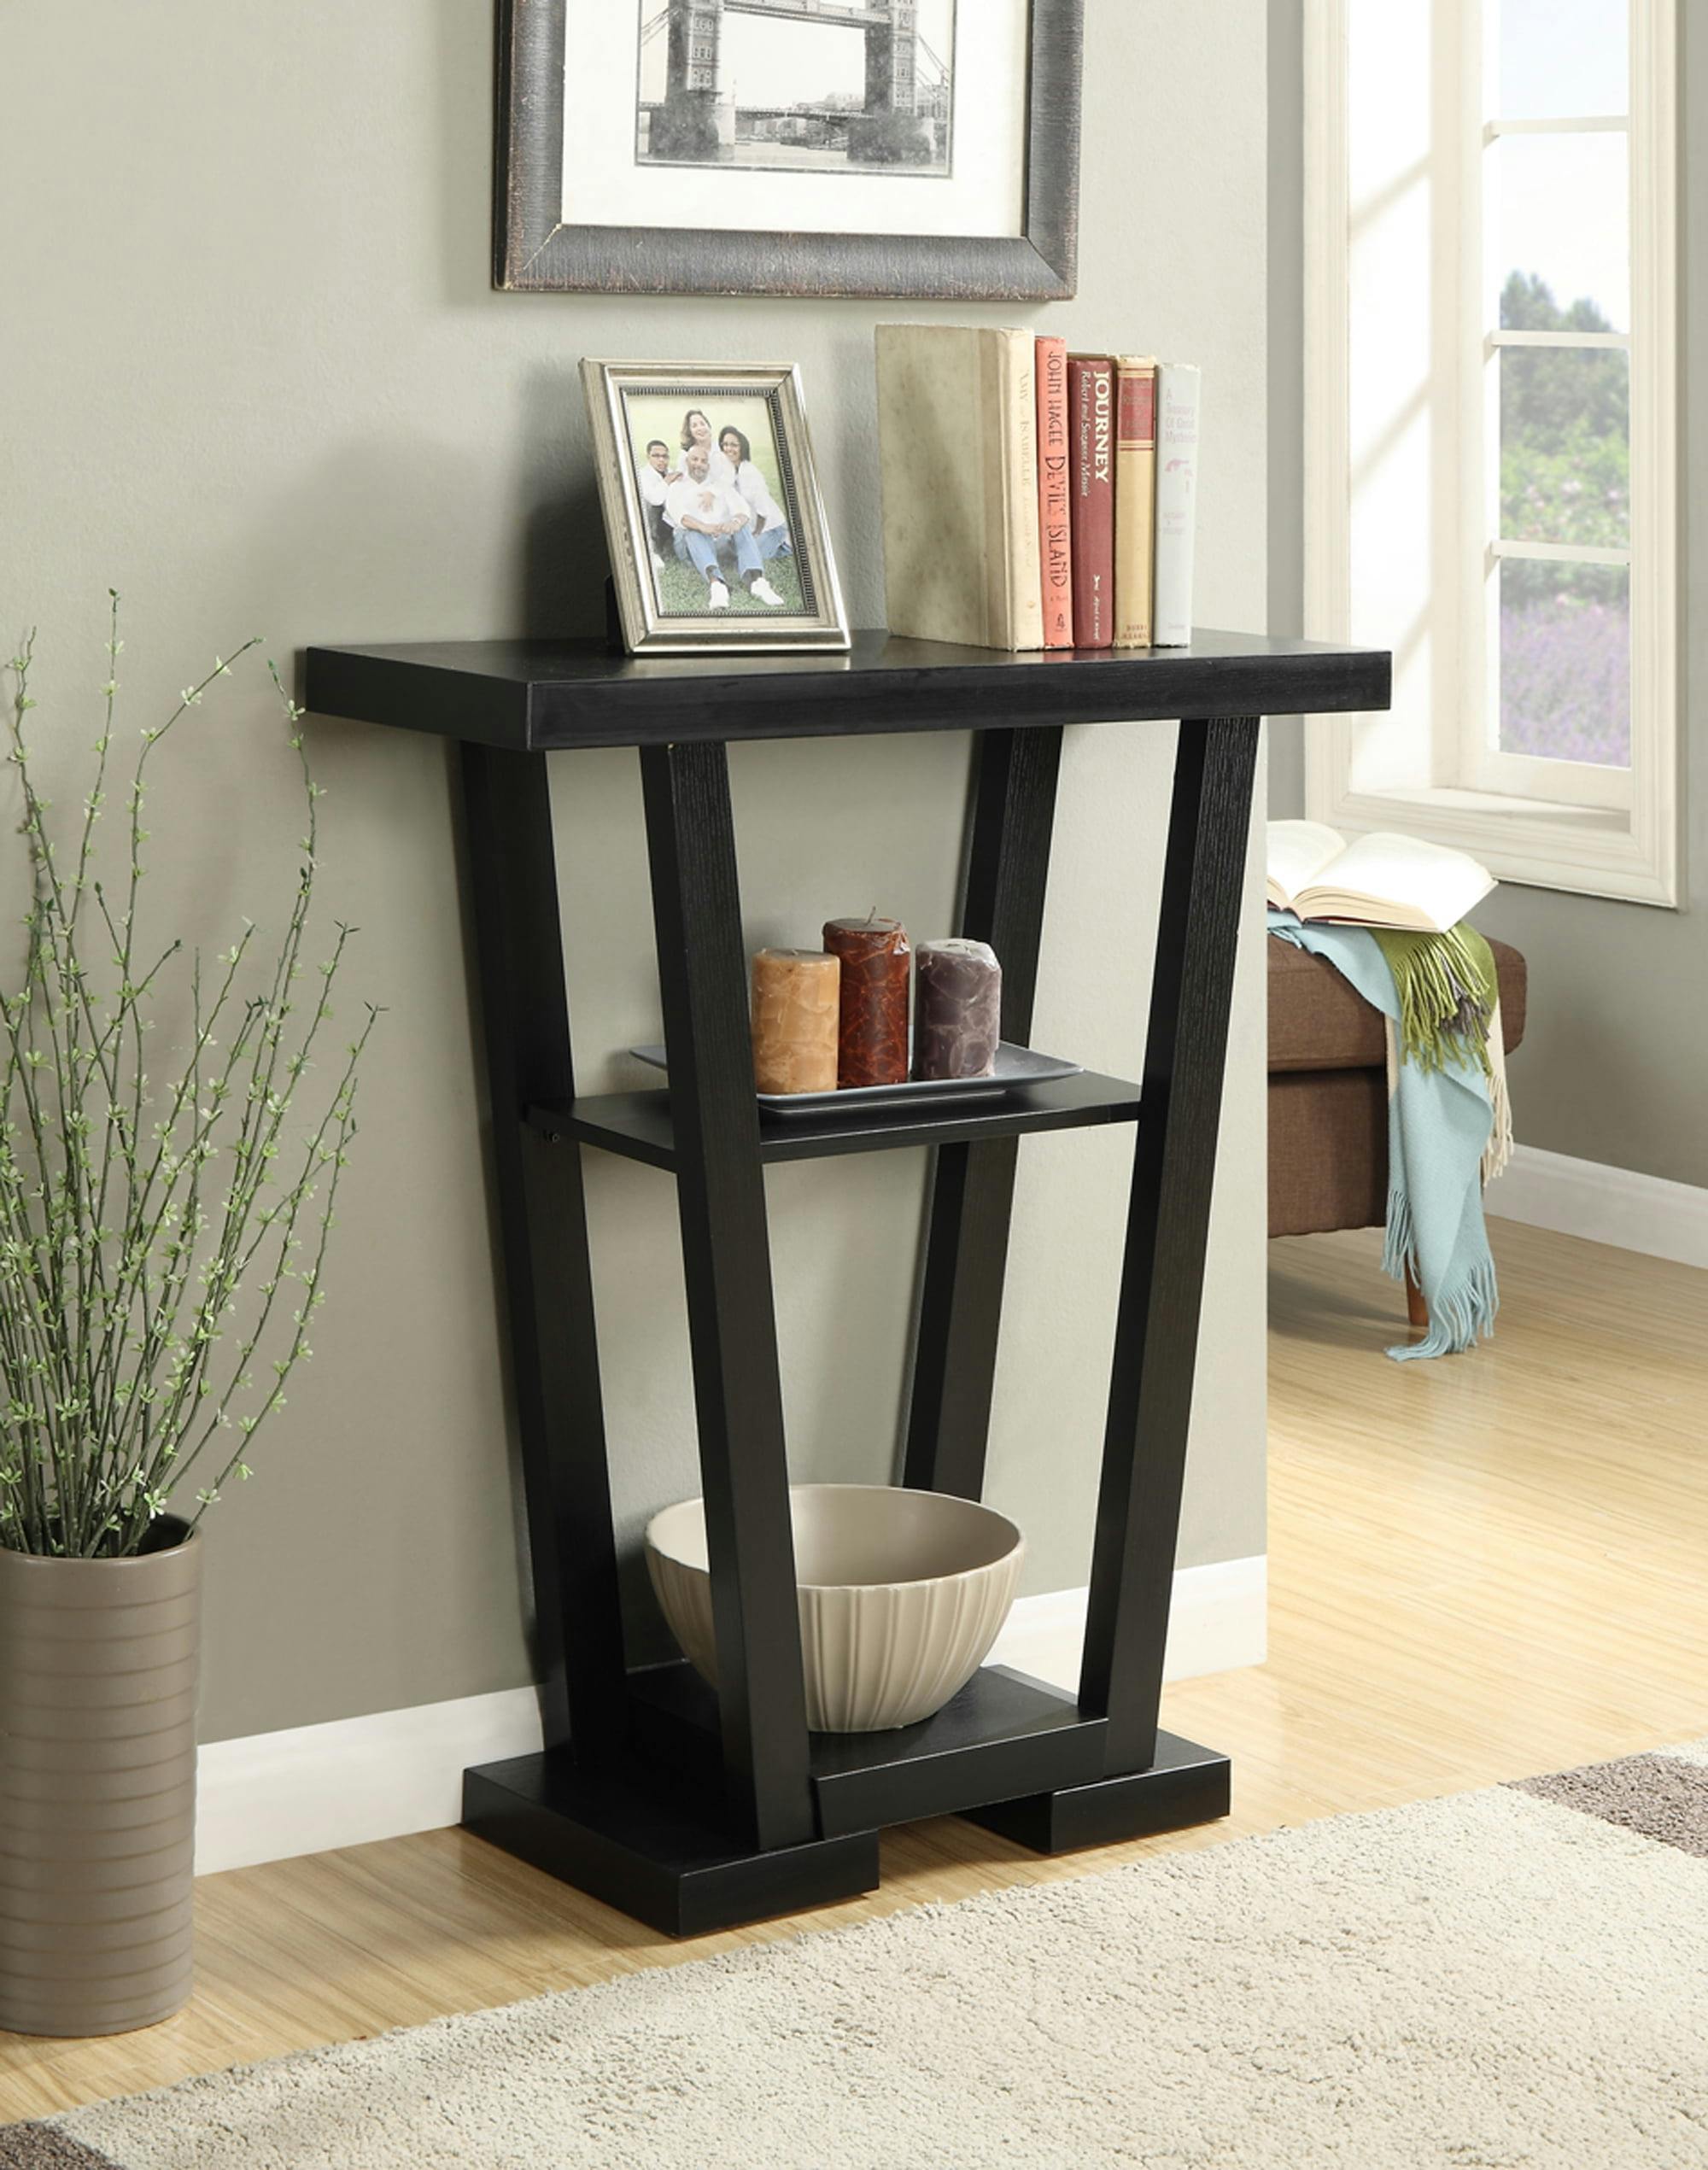 Newport V Sleek Black Console Table with Glass Shelves